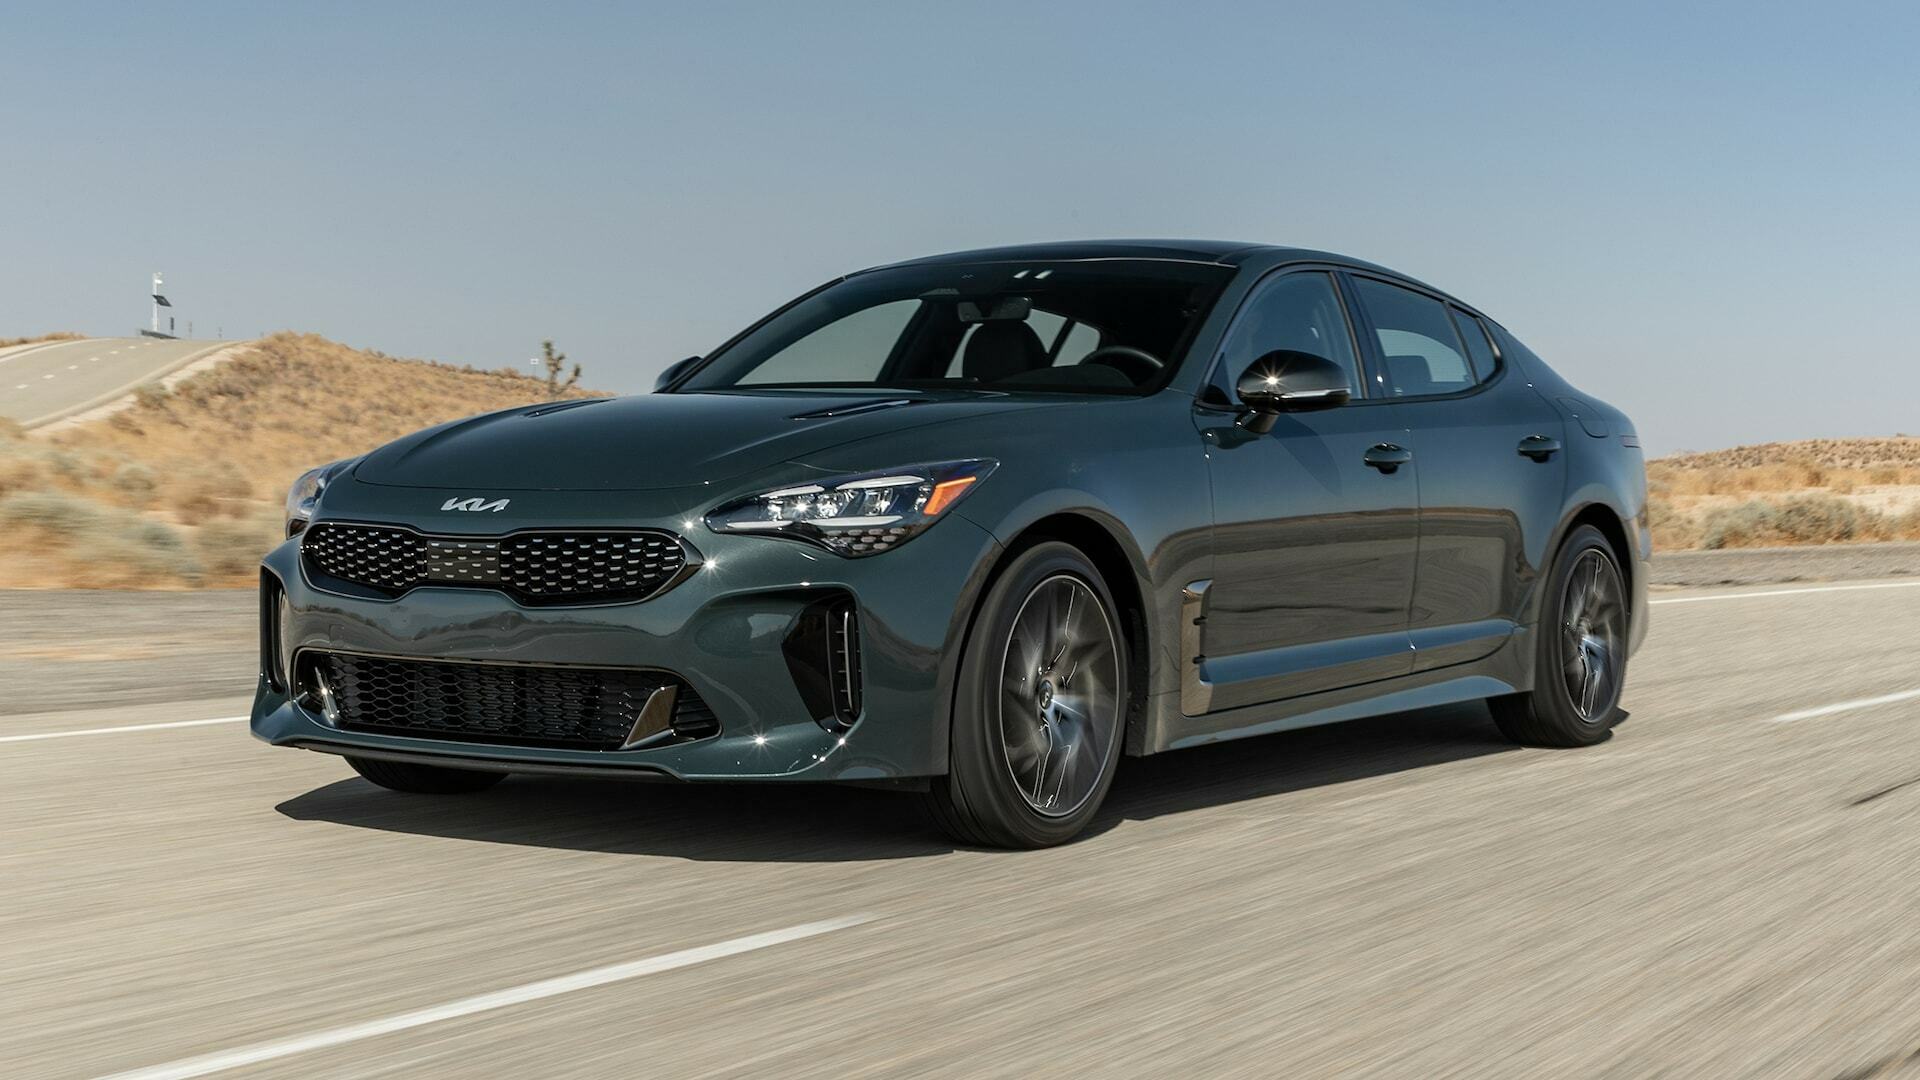 Kia Stinger Lease Payments & Offers